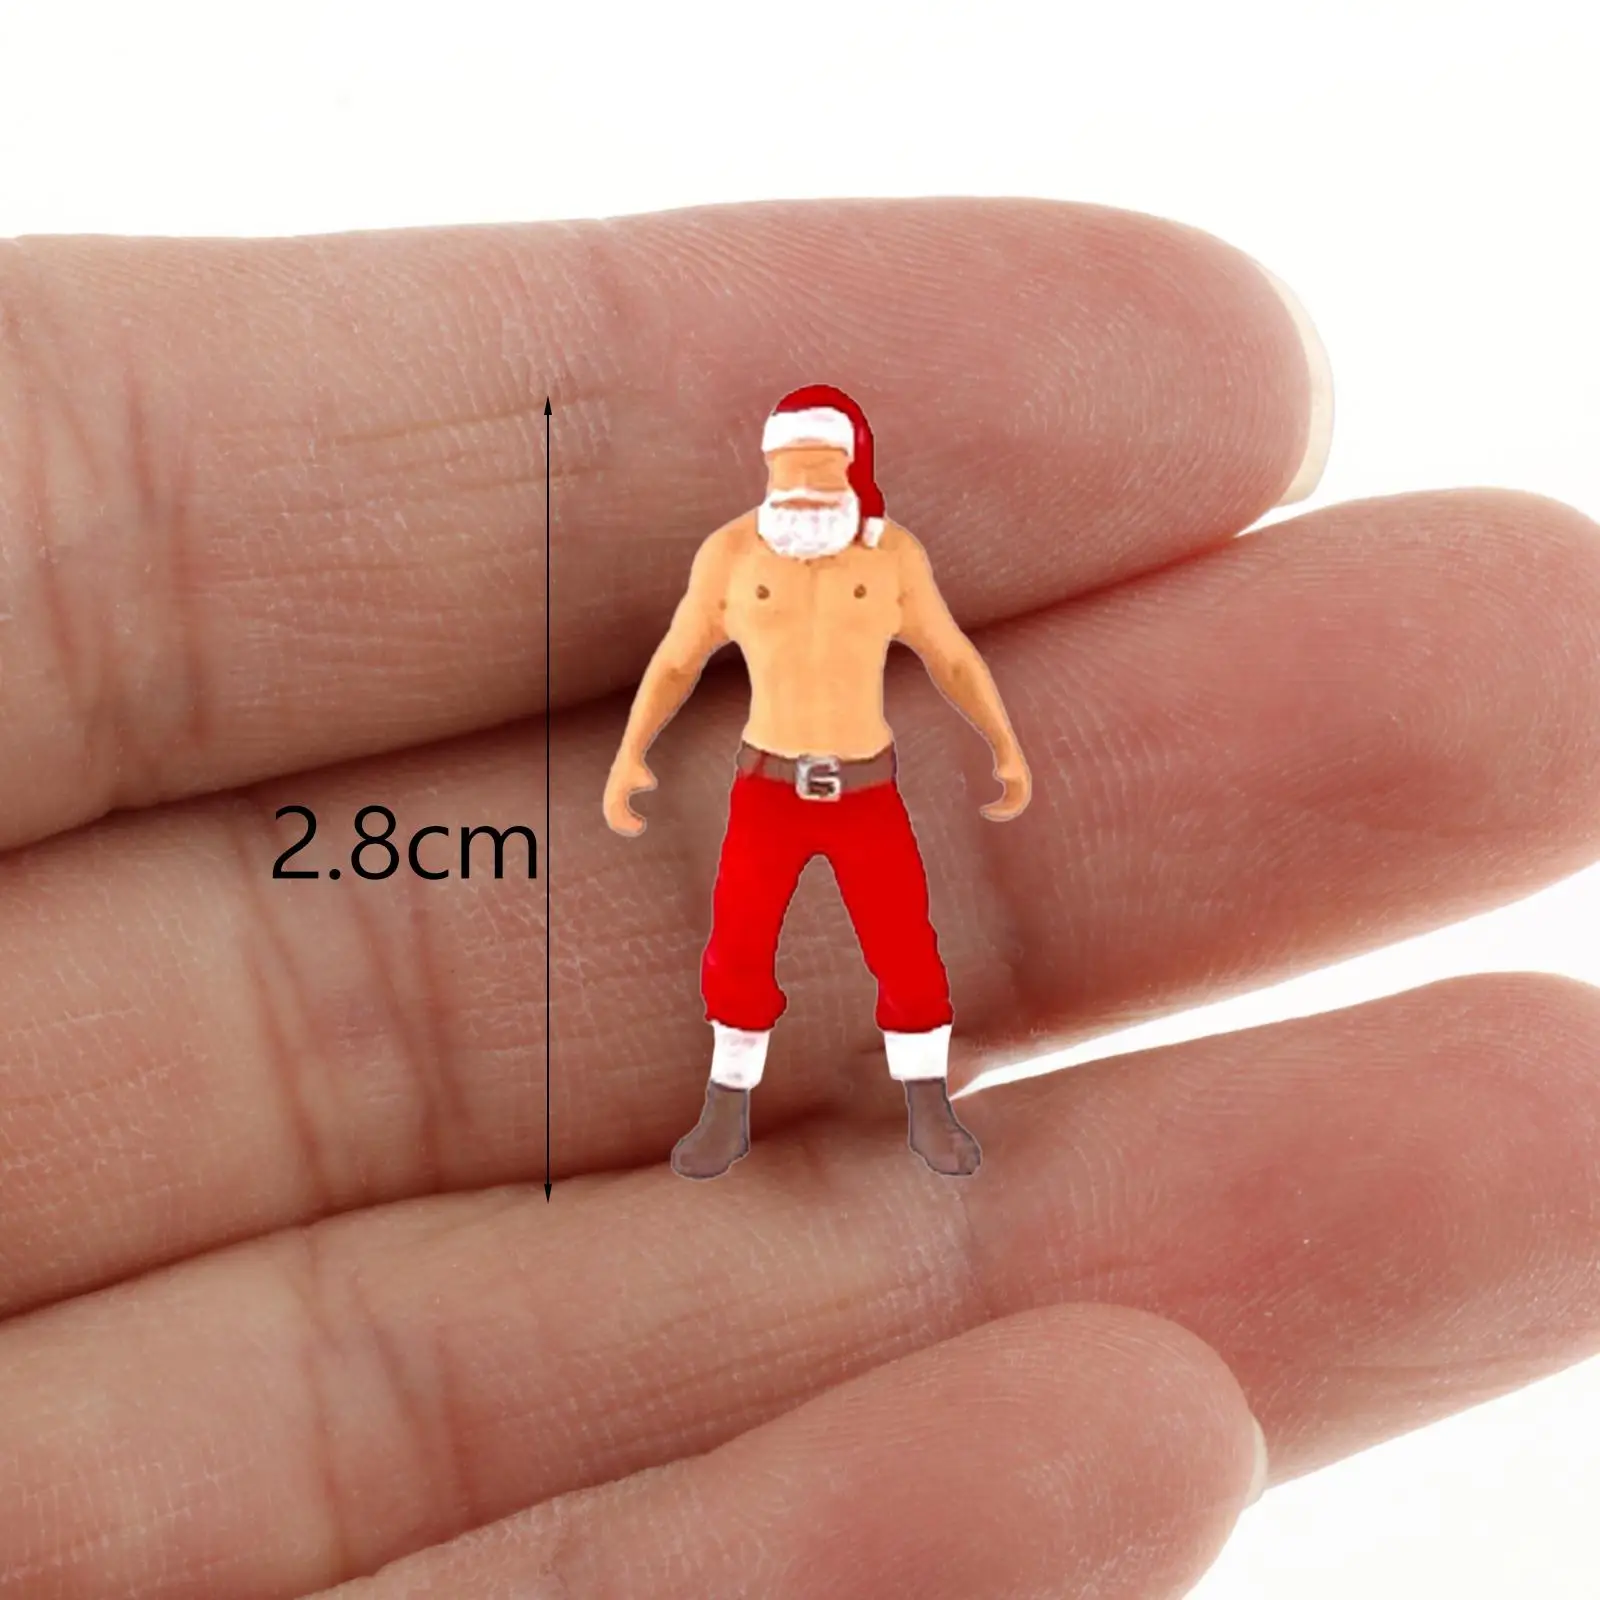 1/64 Christmas Scenes Resin Figure Scene Props Doll Figures Handpainted Miniature Figurines Santa Claus for Dollhouse Layout